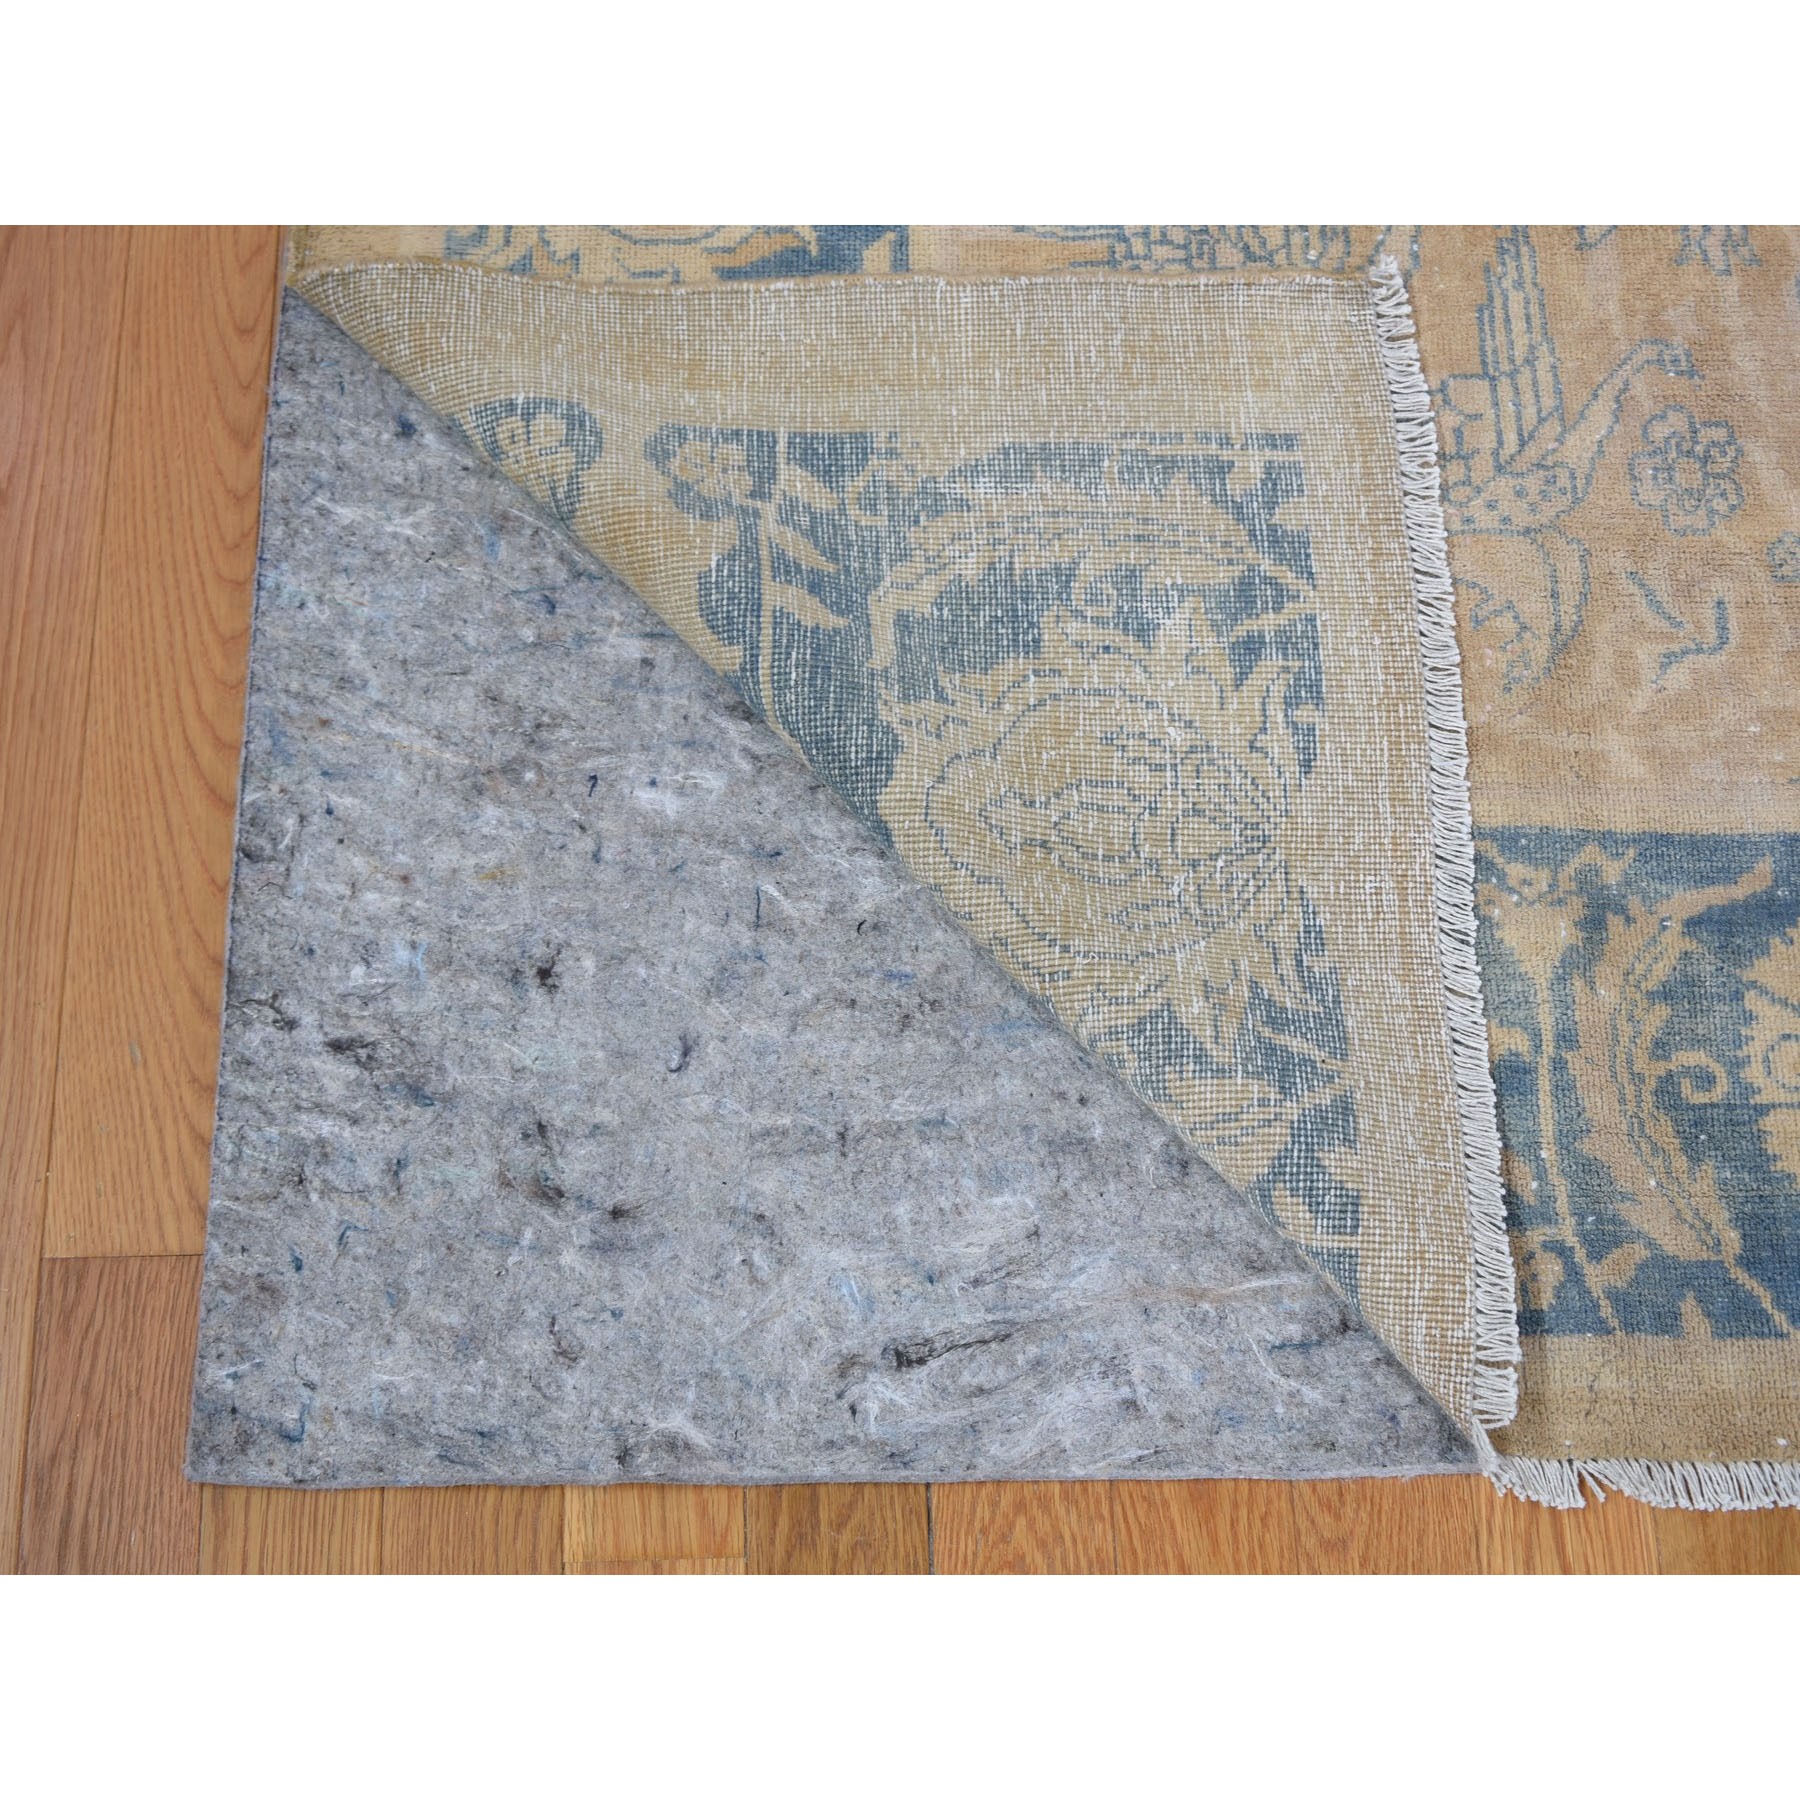 12'9"x17'3" Oversized Beige Antique Turkish Sivas With Parrots and Swans Hand Woven Oriental Rug 